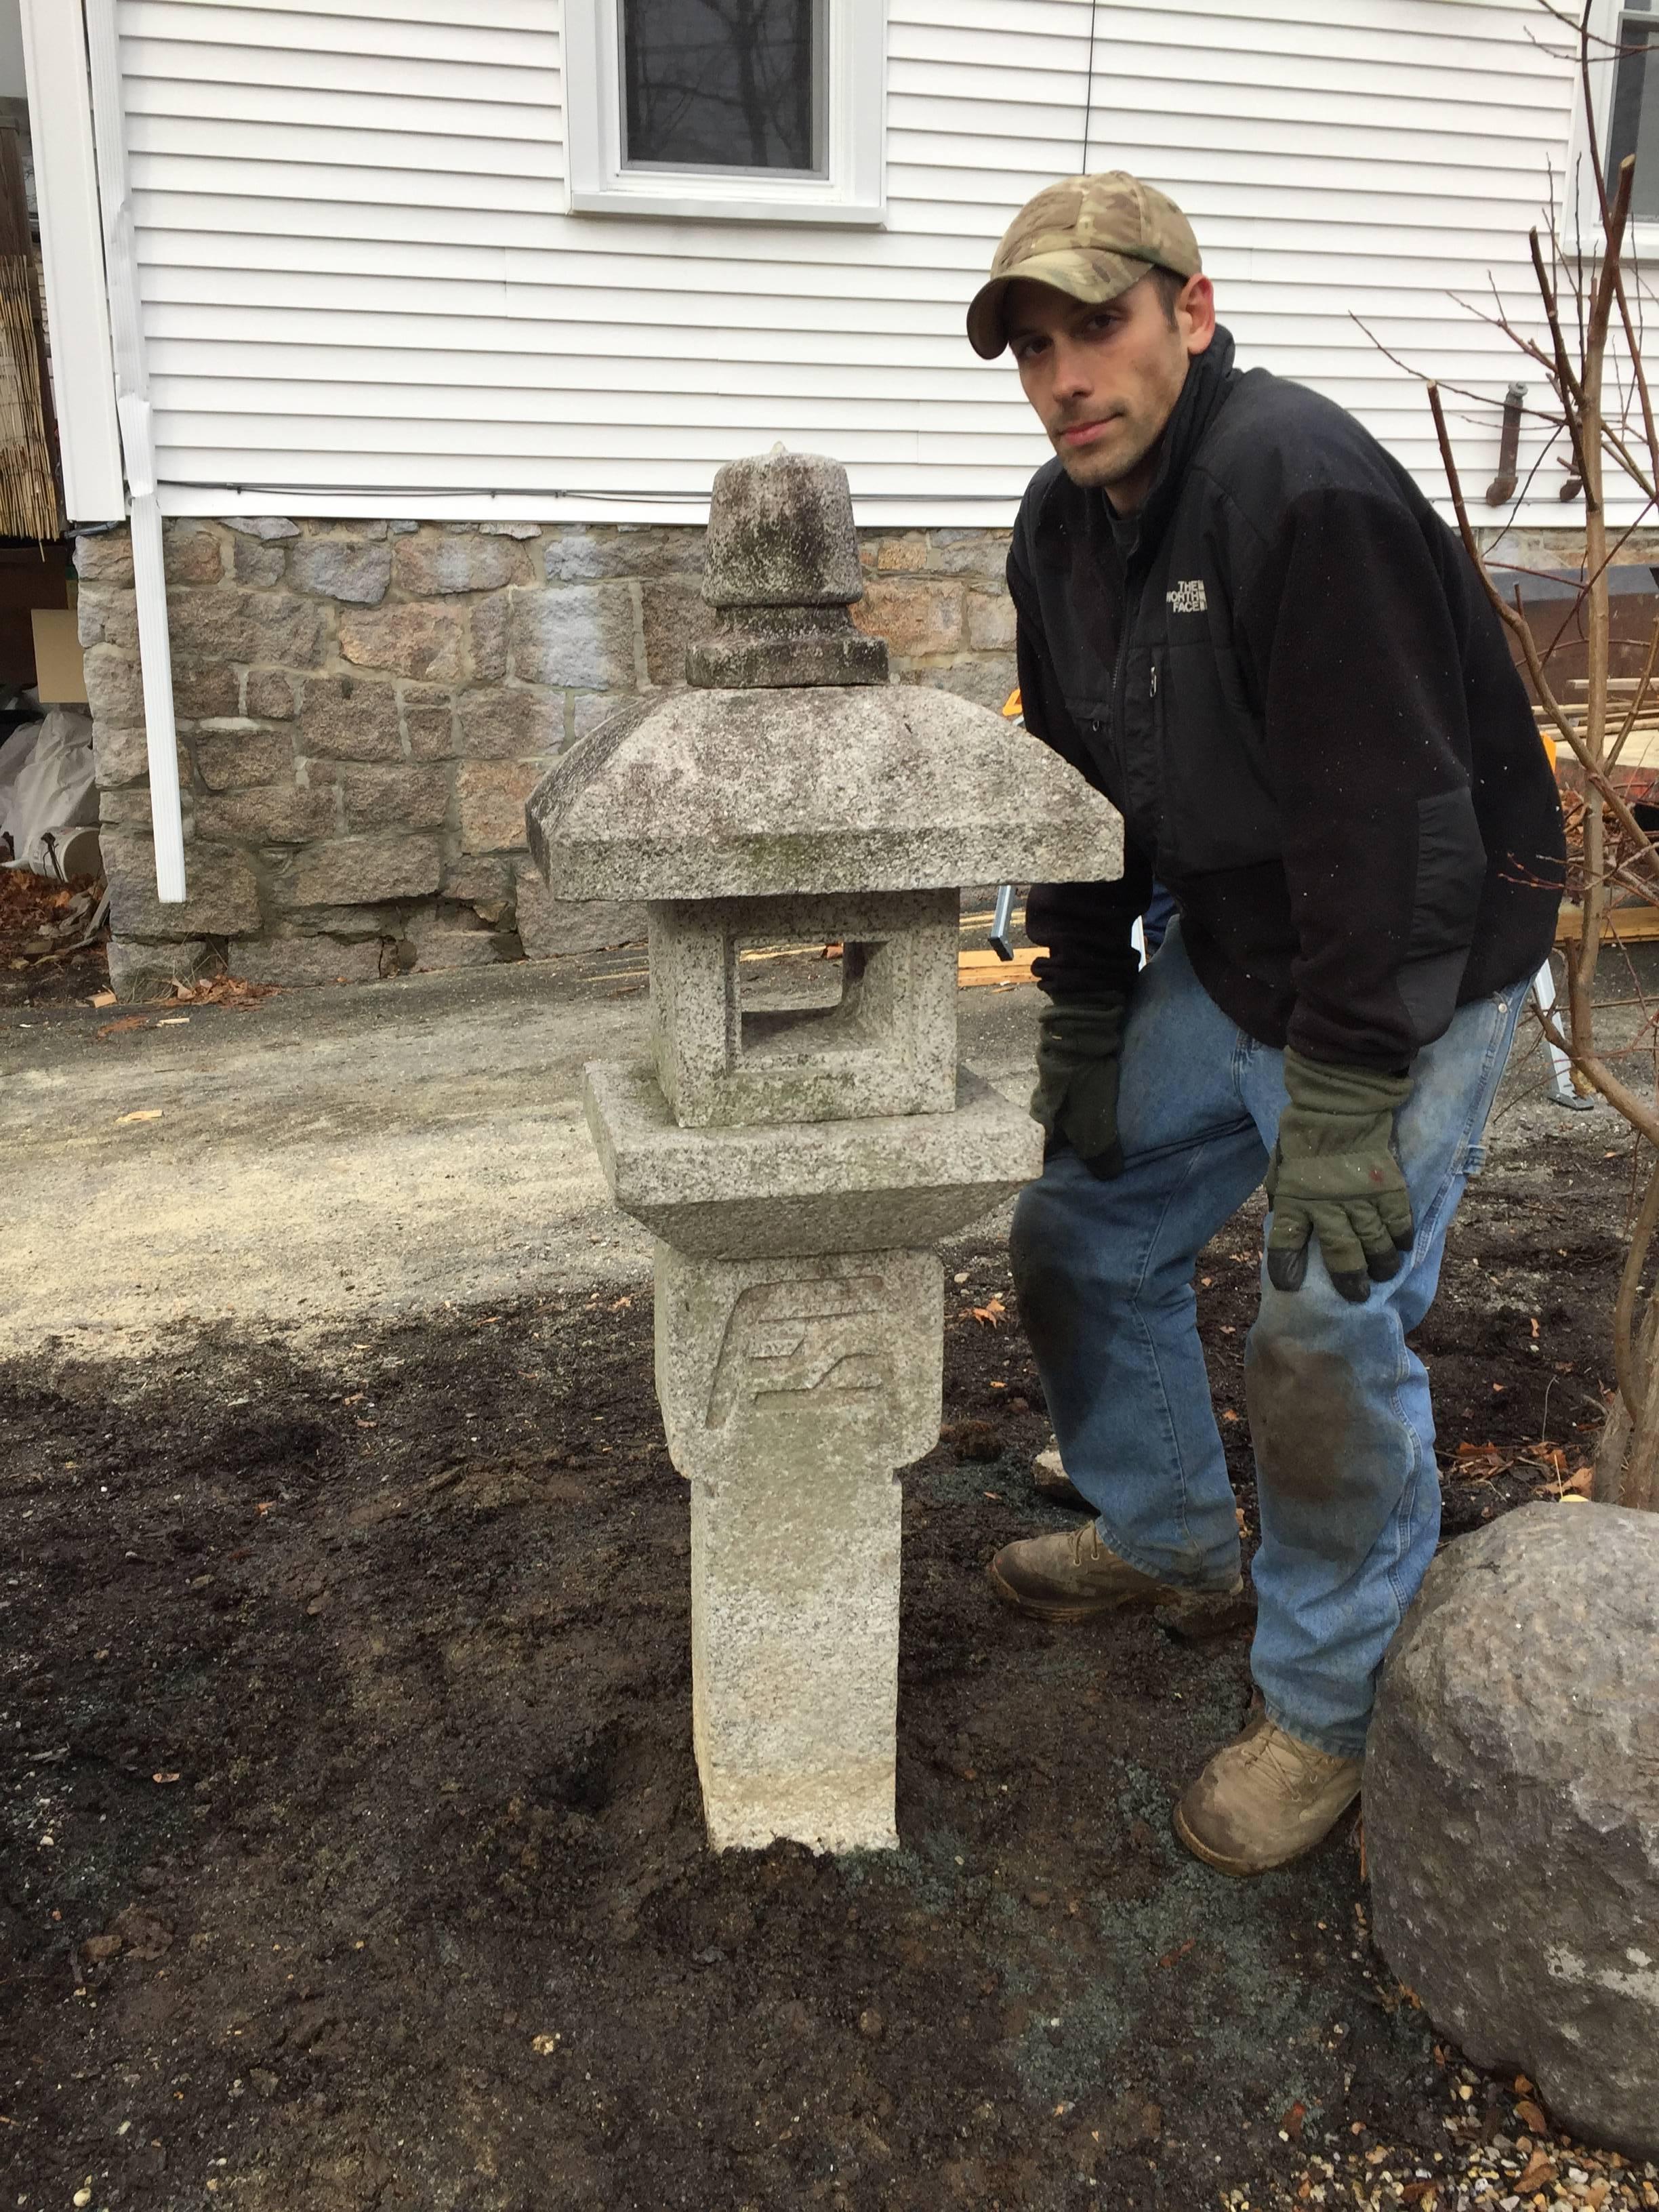 Japan “Oribe” granite stone lantern , five pieces, 55? high, very nice old patina from good age, early to mid-20th century.
Sanskrit incising on base. A beautiful style ideal for most gardens.

Dimensions: 52 inches high and 18 inches wide

The